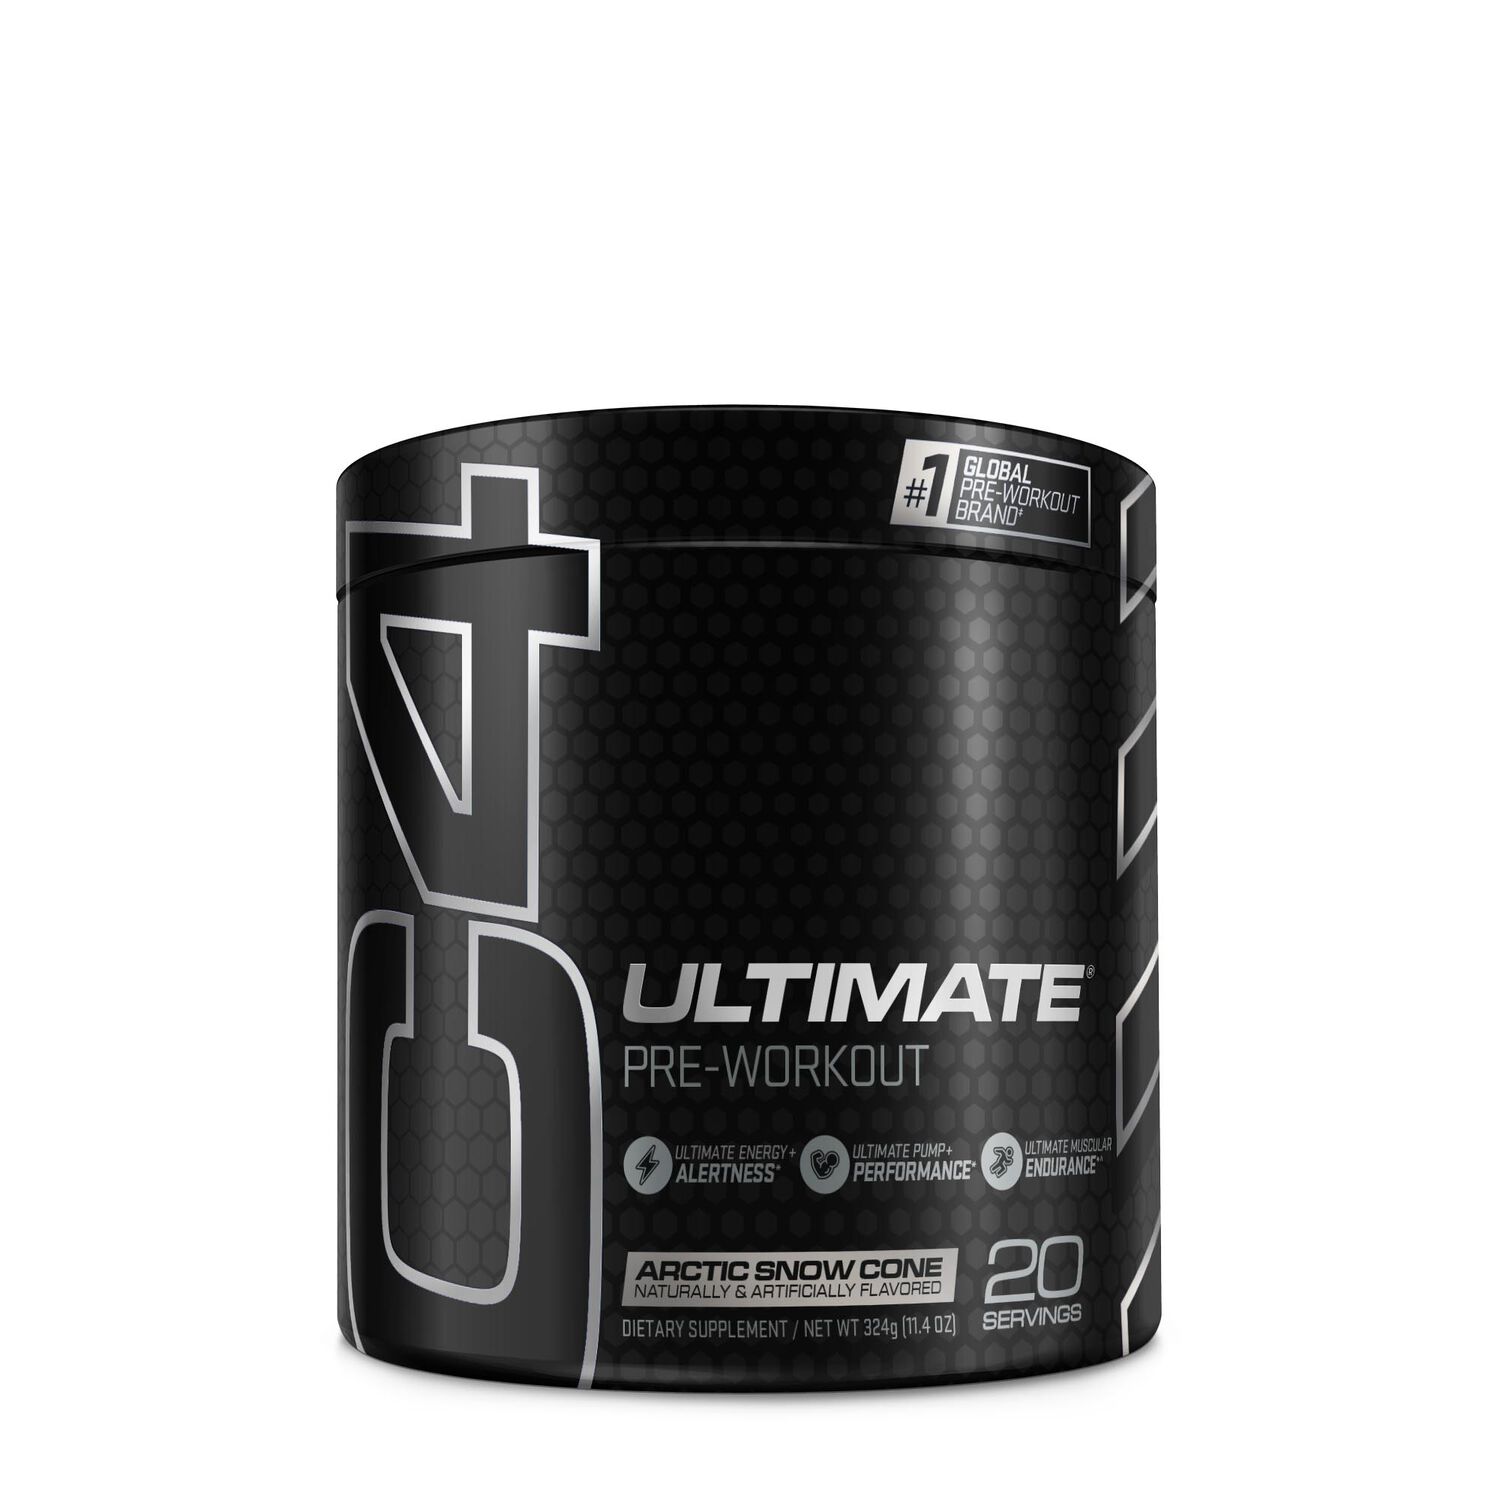 Cellucor Ultimate Pre-Workout - Artic Snow Cone (20 Servings)